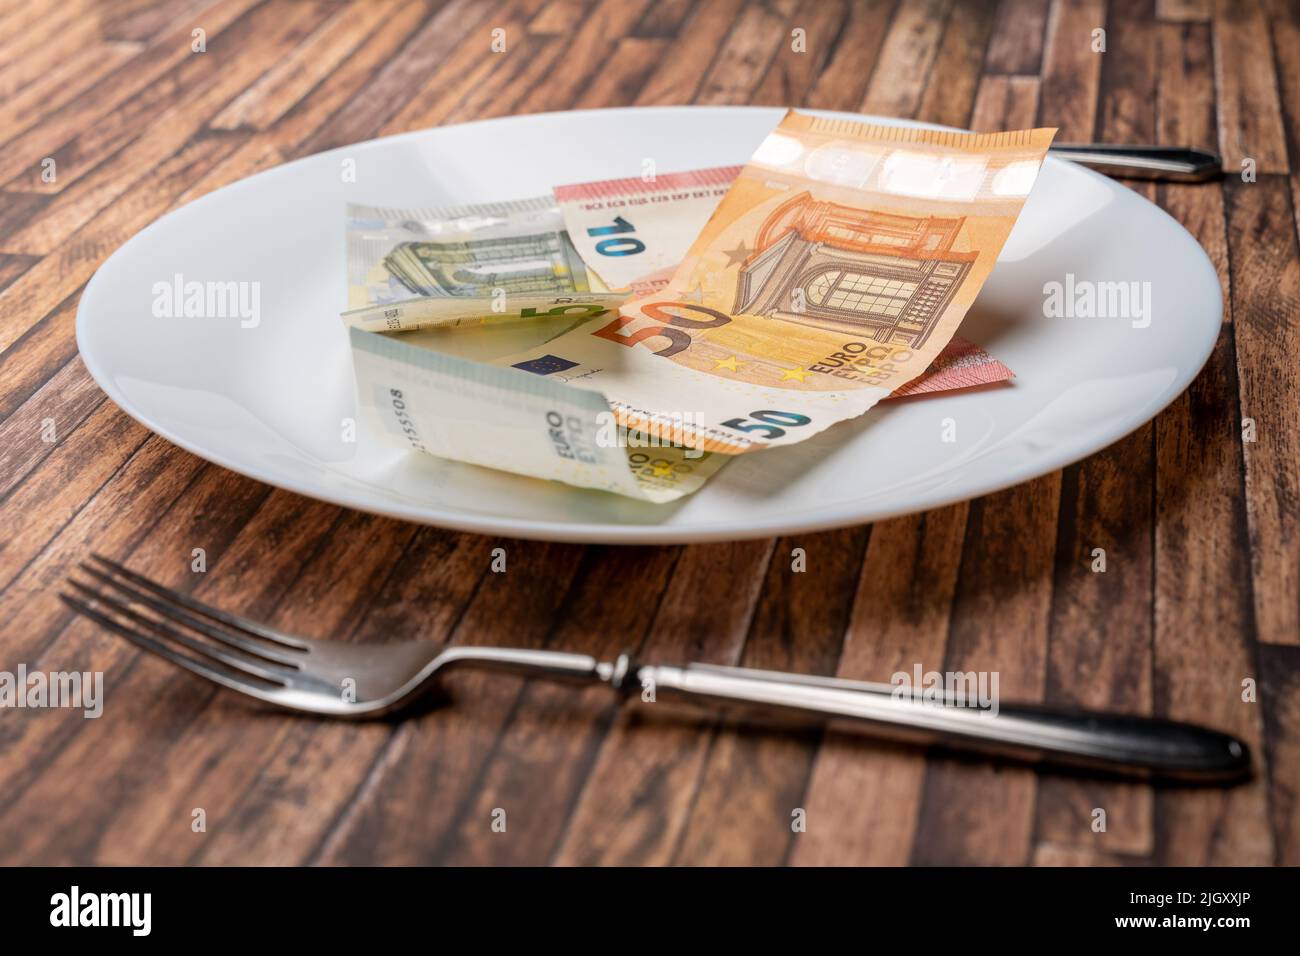 Euro banknotes lying on a dinner plate with cutlery on the table. Symbolic image for eating money notes. Food is getting expensive due to inflation. Stock Photo